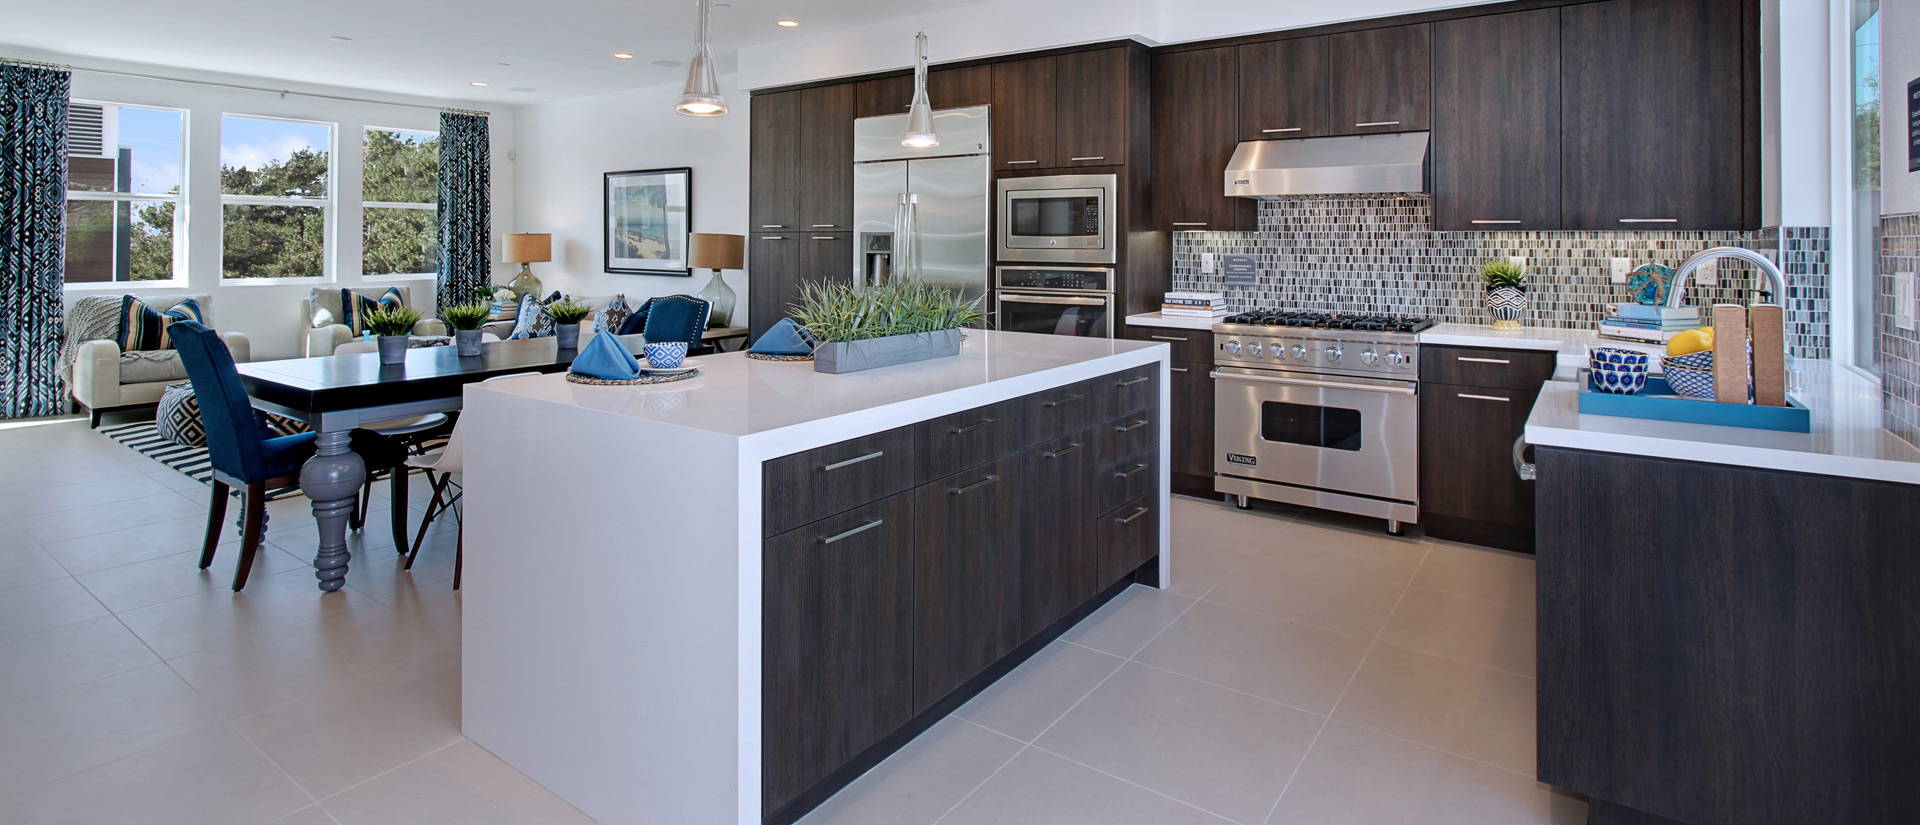 Arctic white quartz countertop in a spacious kitchen with natural light